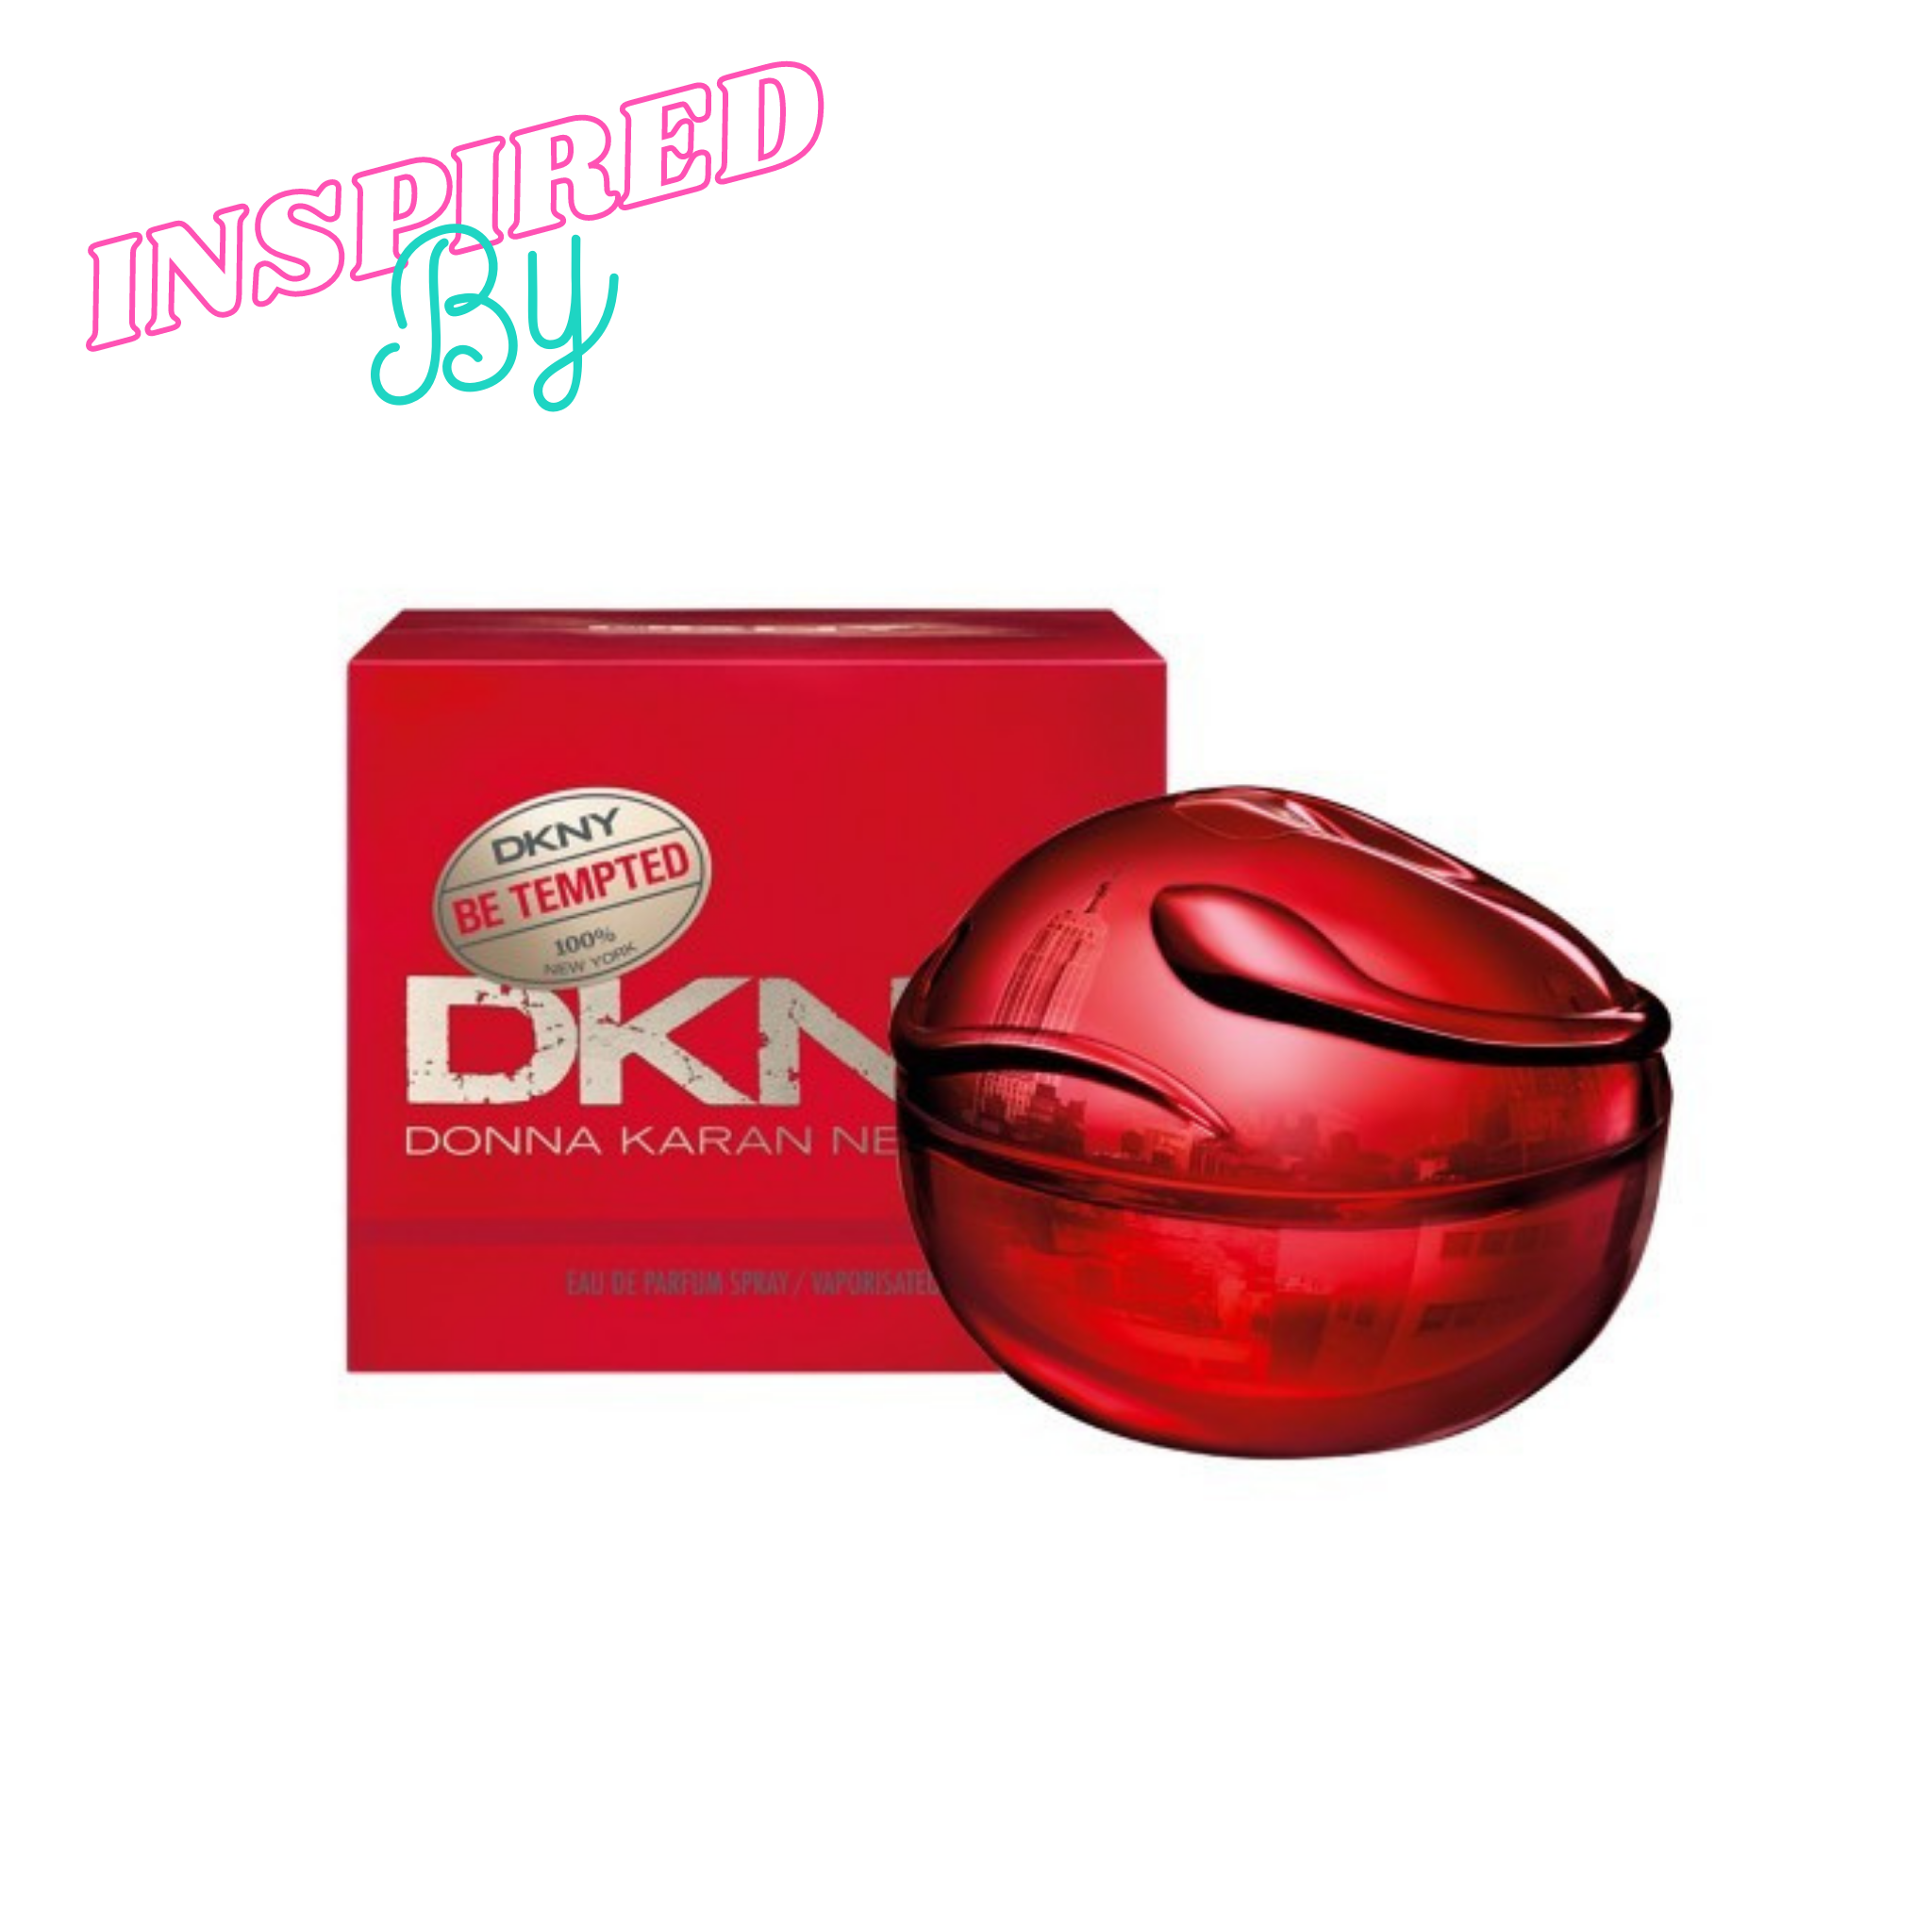 Inspired by DKNY Be Tempted 100ml - Fragrance Deliver SA